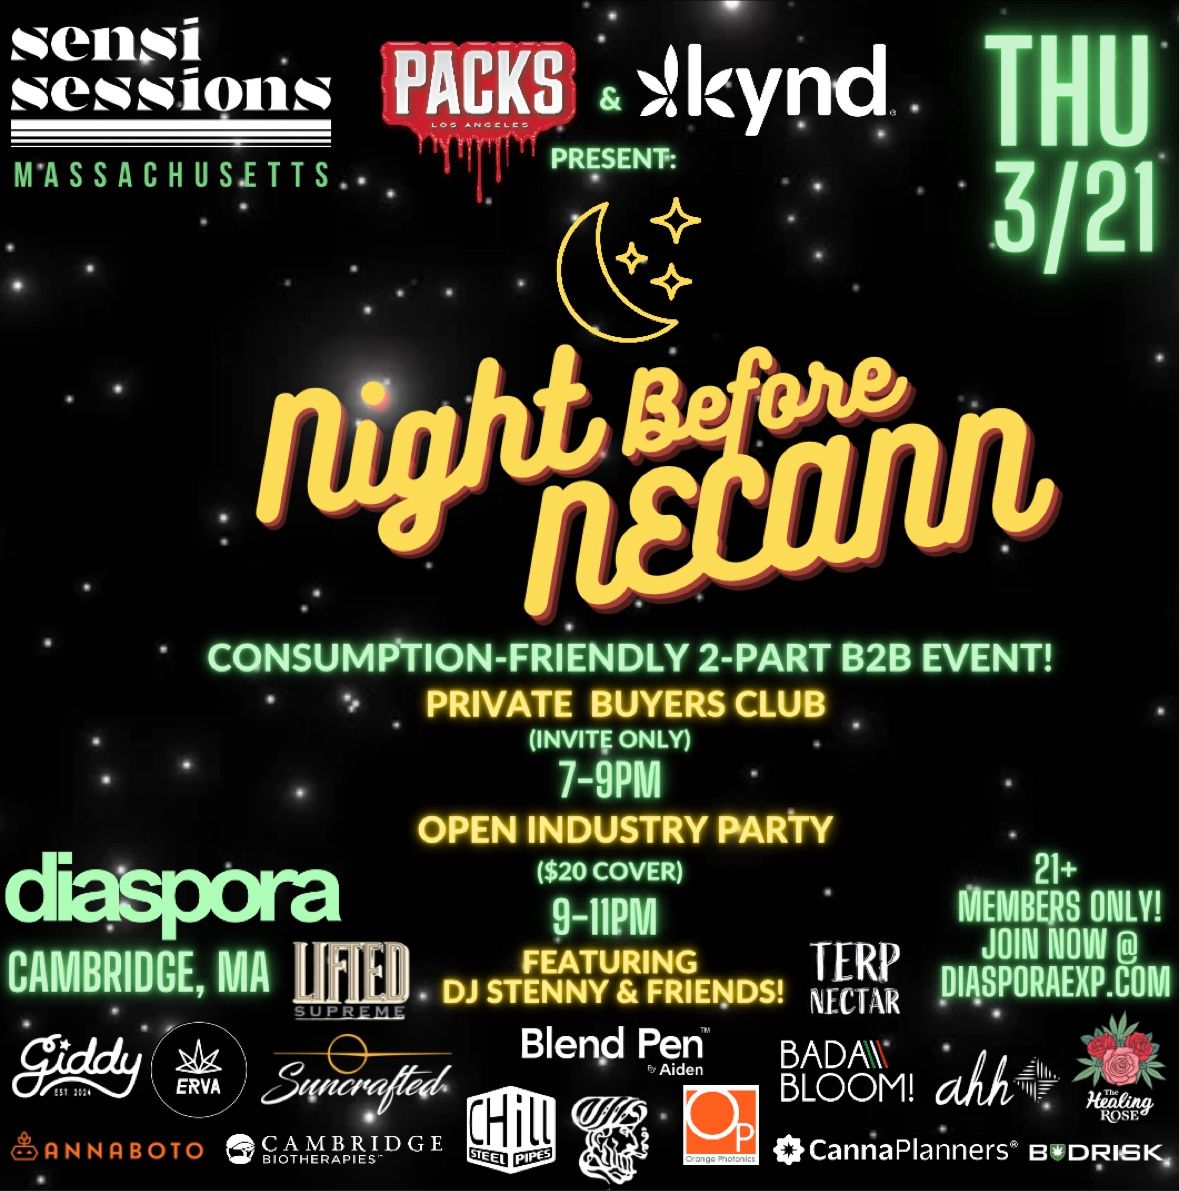 Kick off your NECANN week with Sensi Sessions/Night Before NECANN at Diaspora in Cambridge, MA on Thursday, March 21! For tickets visit loom.ly/fKqK1lk #NECANN #SensiSessions #NightBeforeNECANN #Diaspora #cannabis #consumptionfriendly #B2B #party #DJStenny @sensimag